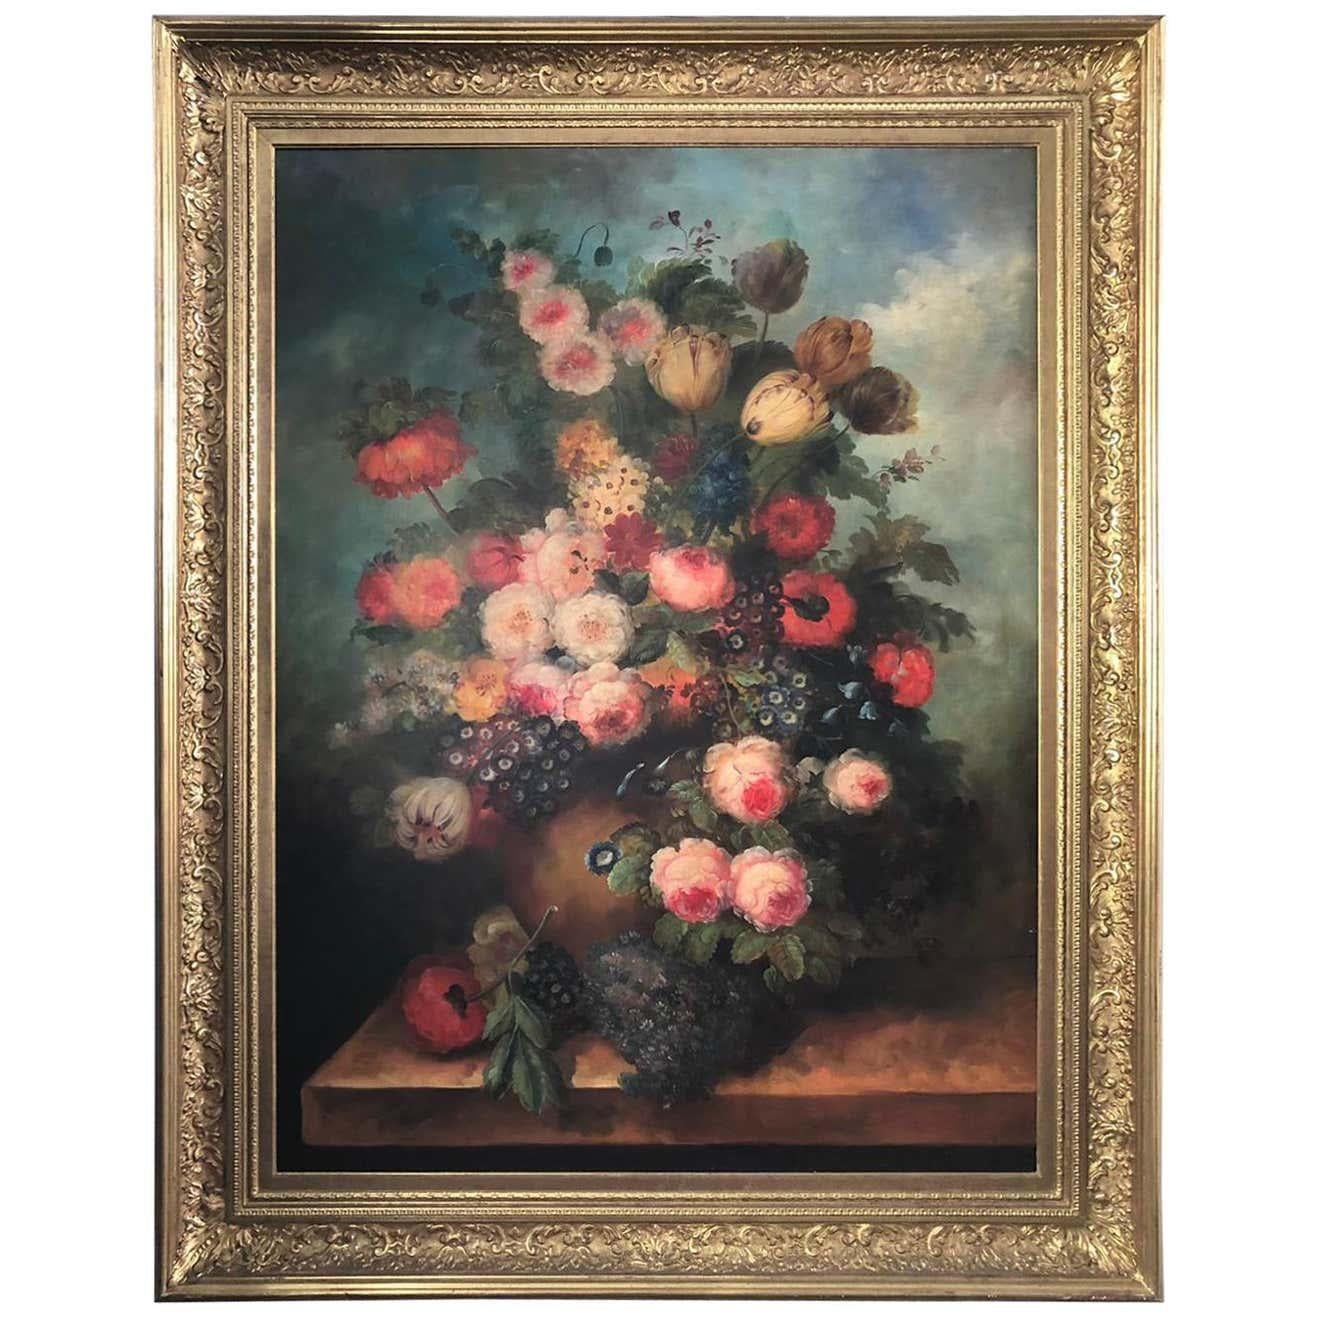 A beautiful and very large bouquet of carnations still life, 20th century “Multi-Petal” Roses, Hyacinths, “Coronary” Anemones, Scarlet Catryophyllaceae and Convolvulaceaous plants in an embossed metal vase”. Oil on canvas. Comes in a very large Gold